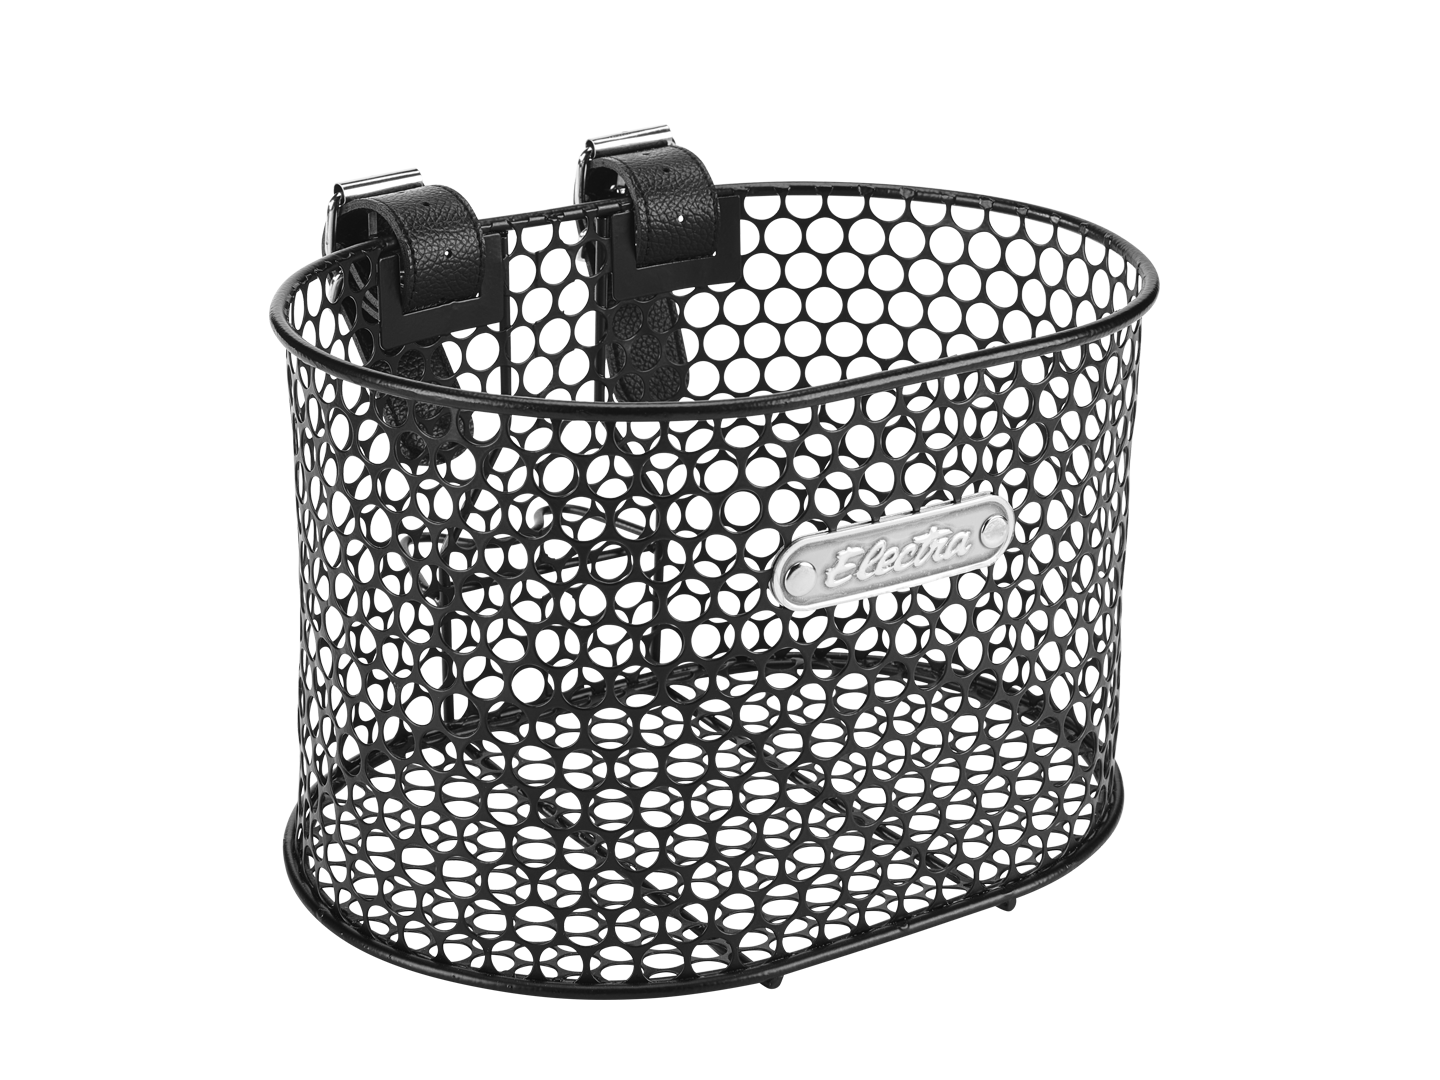 Basket Electra Honeycomb Small Strap Front Black